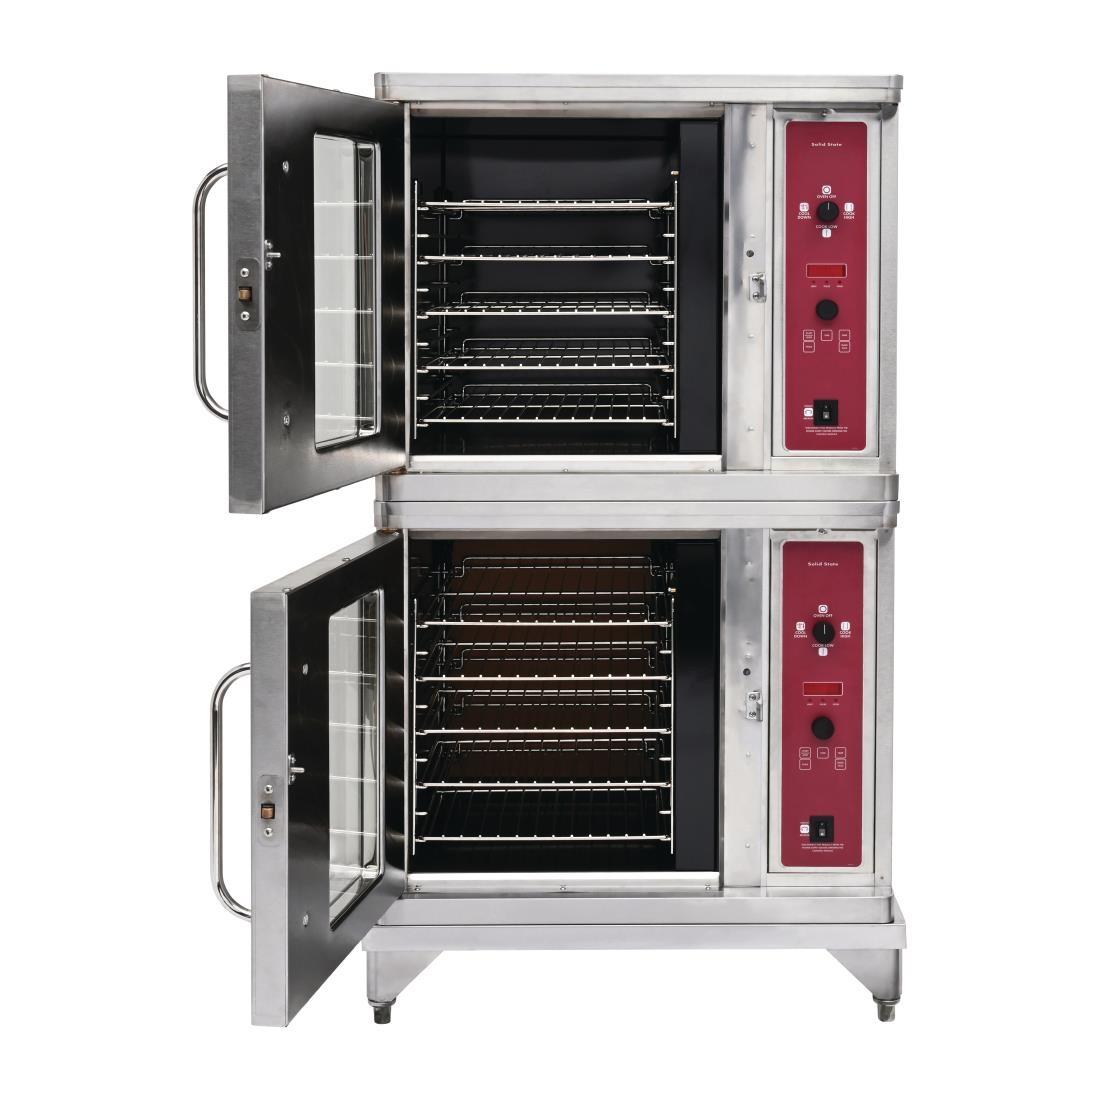 Blodgett Half Size Double Stacked Convection Oven CTB-2 - FP875  - 2